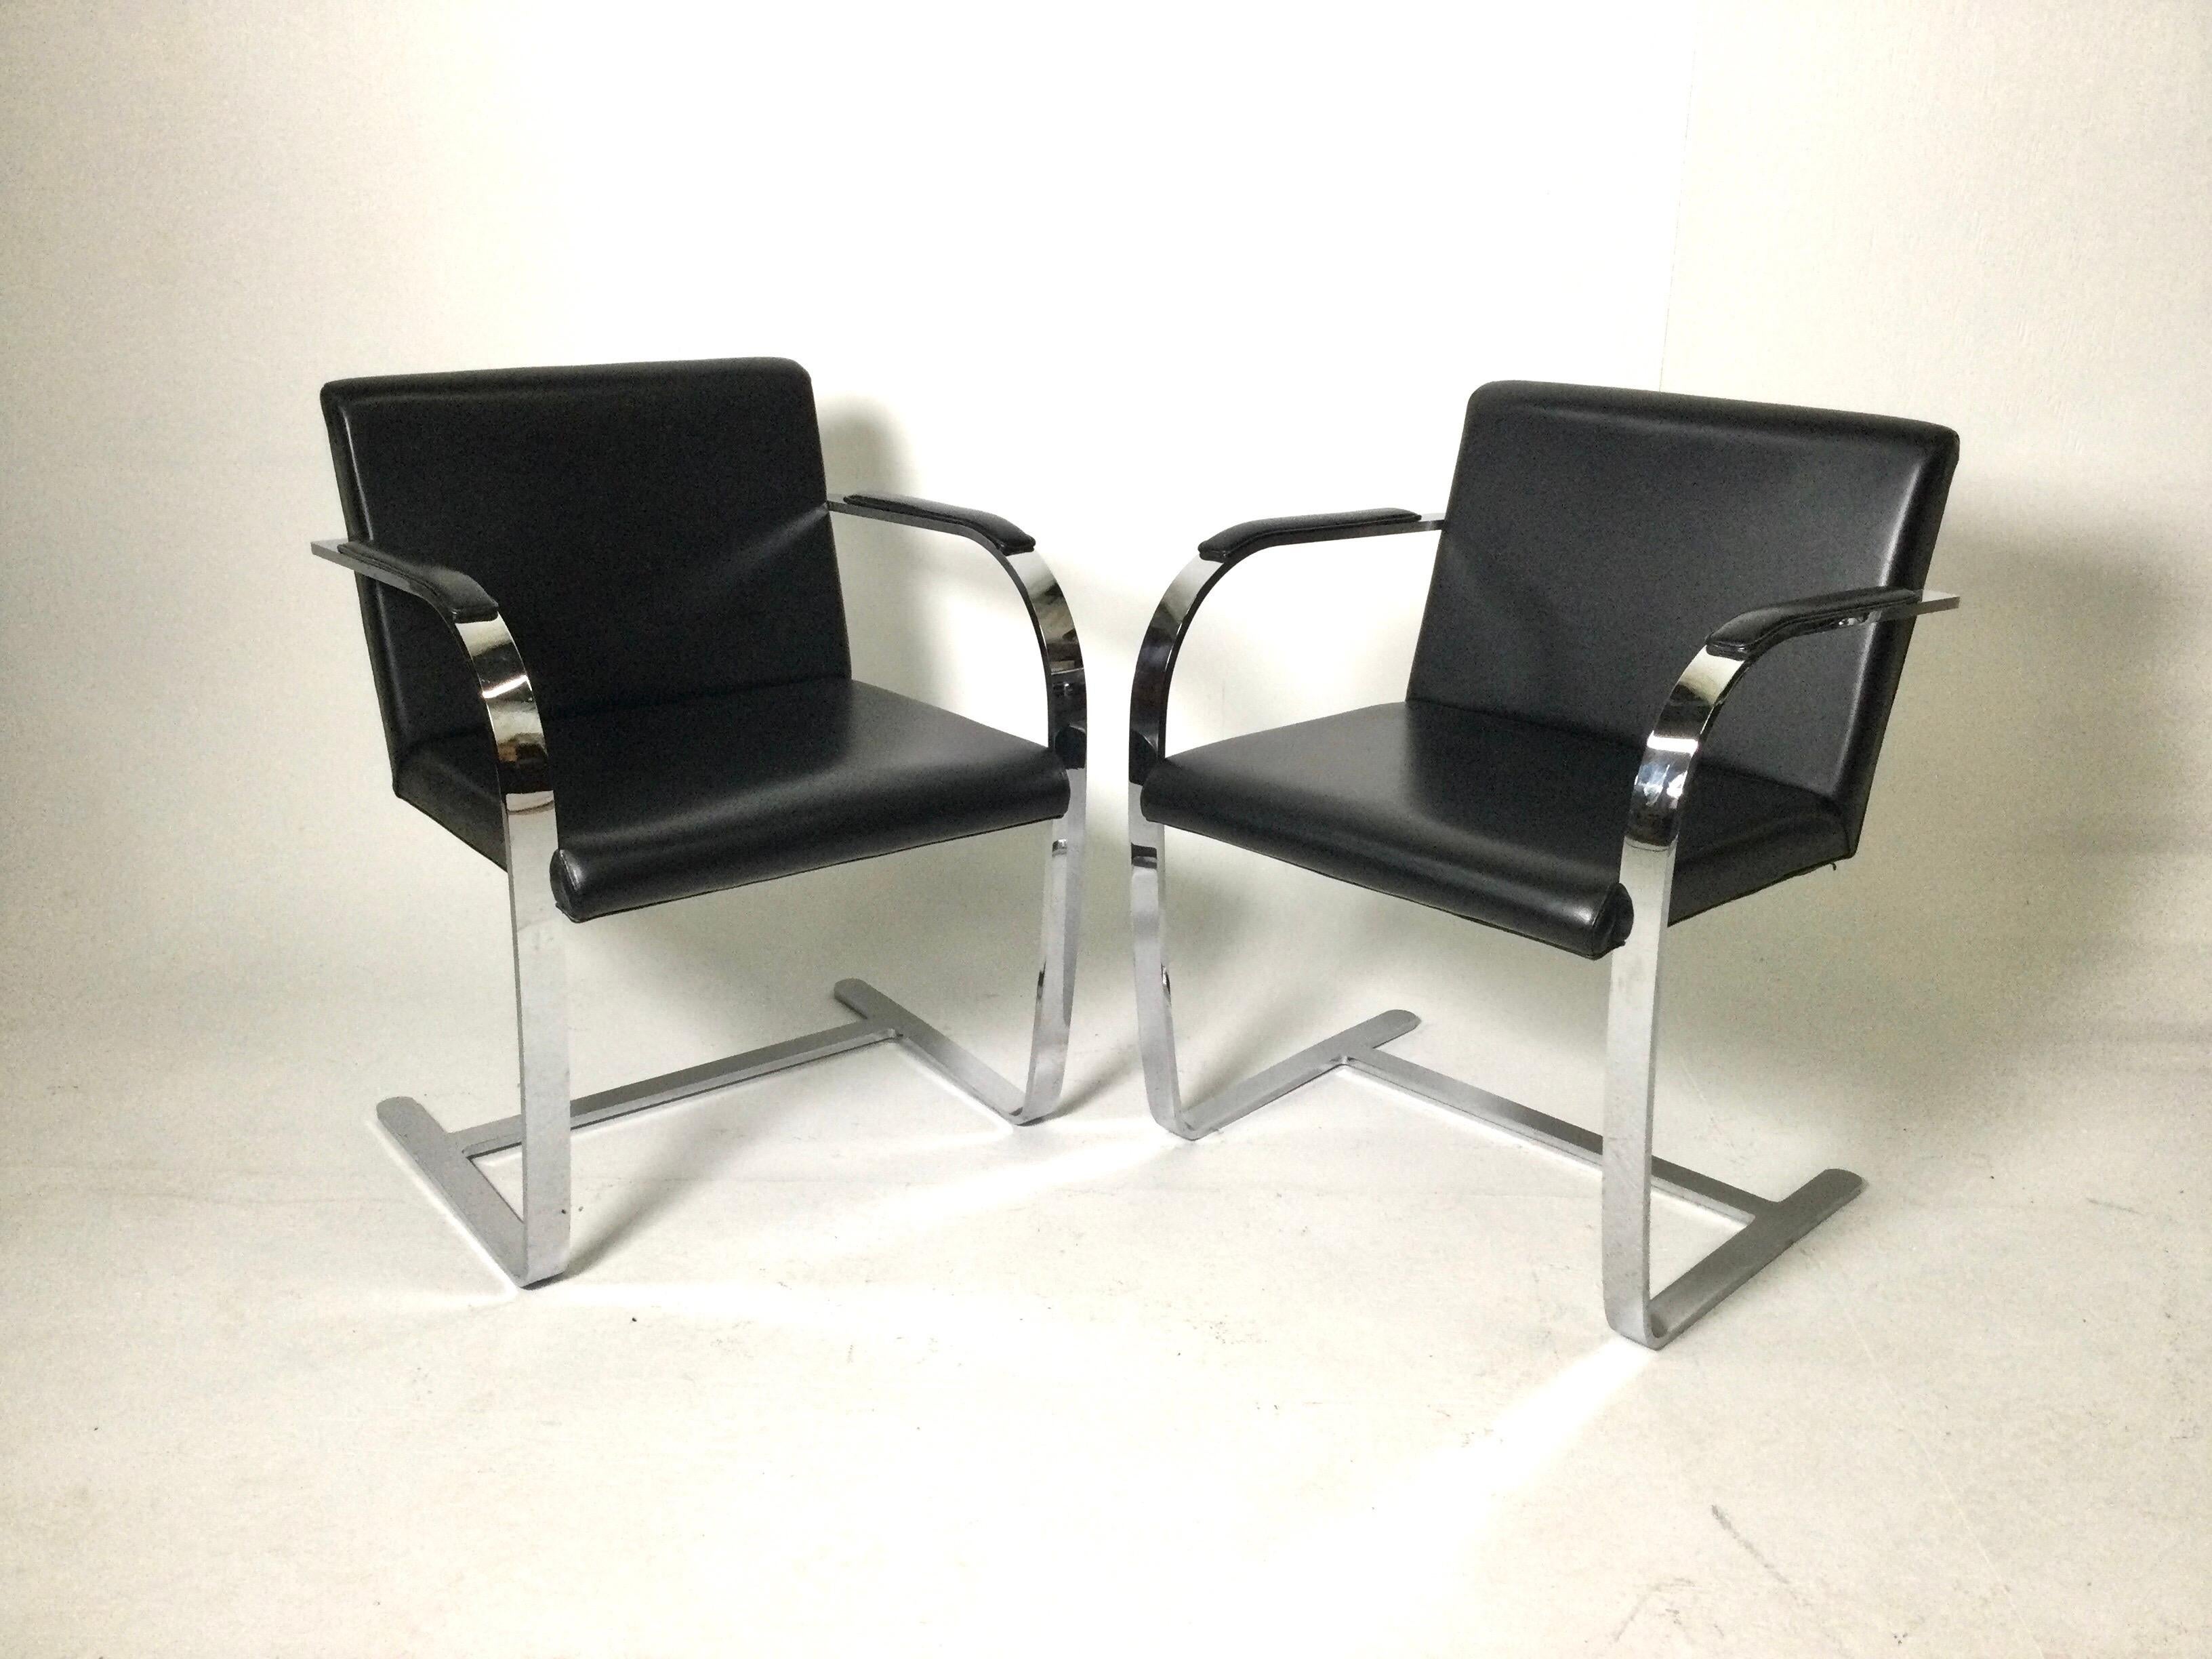 Pair of Knoll Bruno Style Flat Bar Chairs with Black Leather Upholstery In Good Condition For Sale In Lambertville, NJ